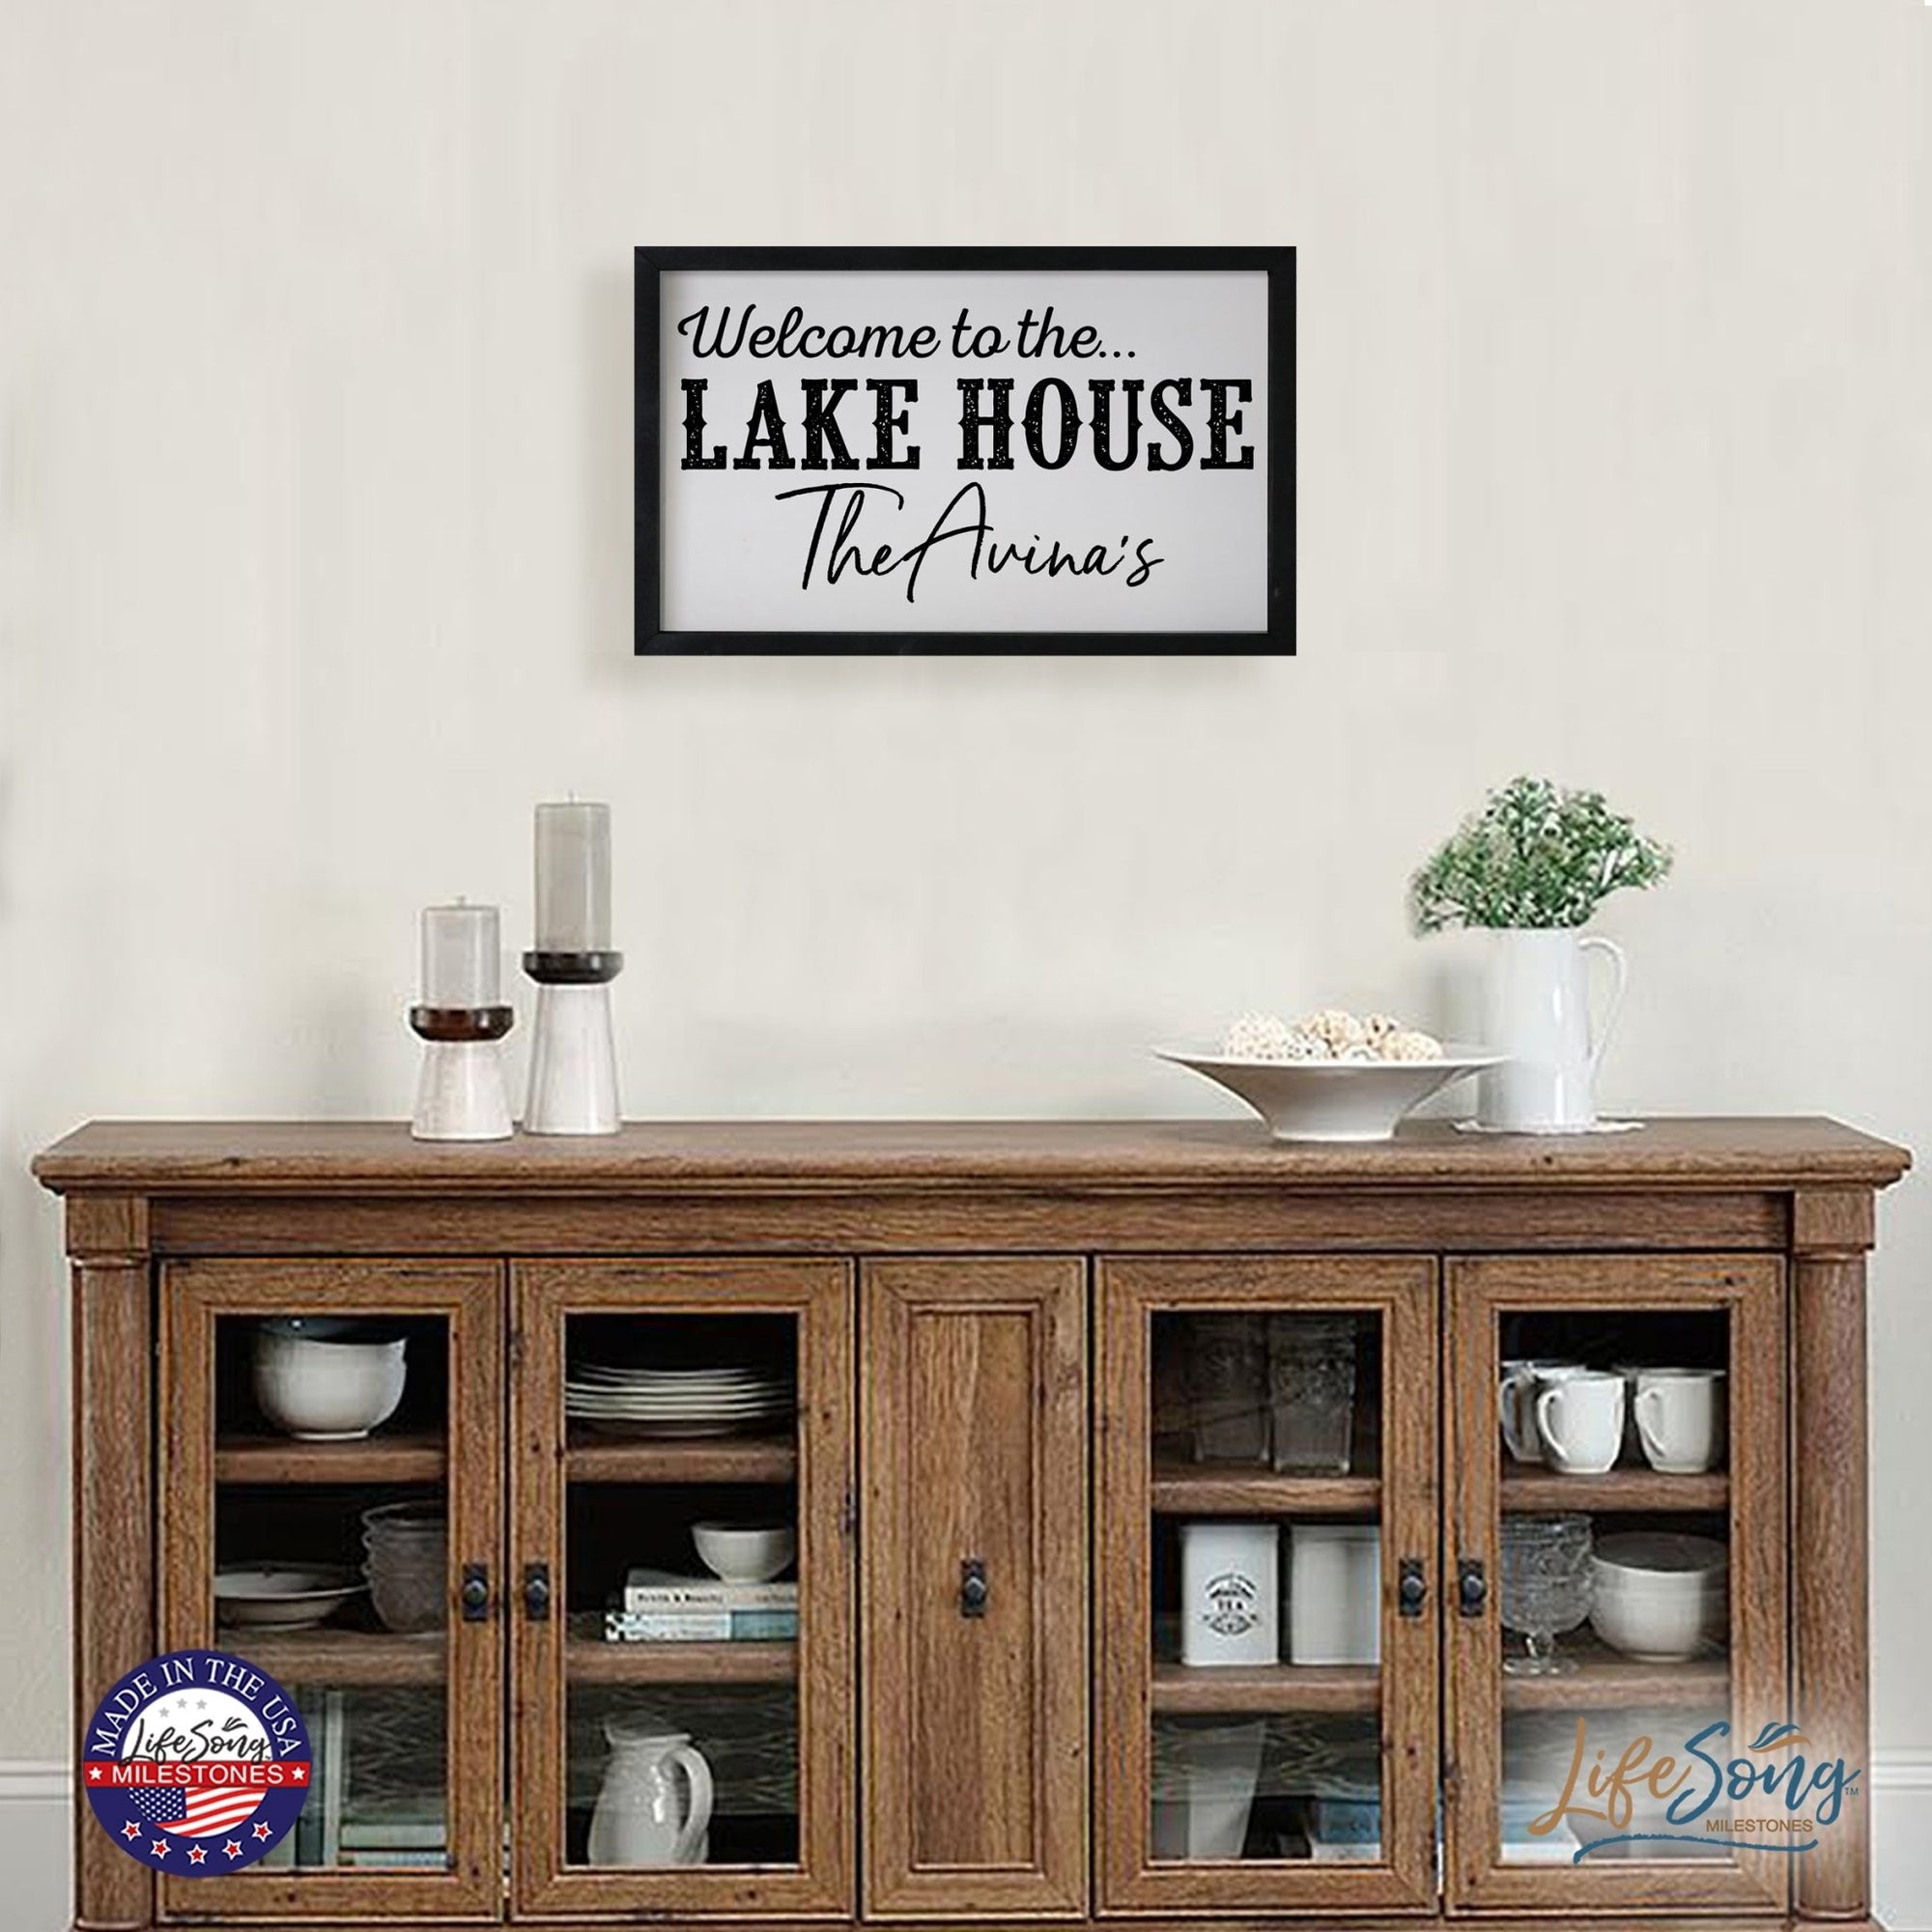 Inspirational Personalized Framed Shadow Box 16x25 - Welcome to the Lake House - LifeSong Milestones